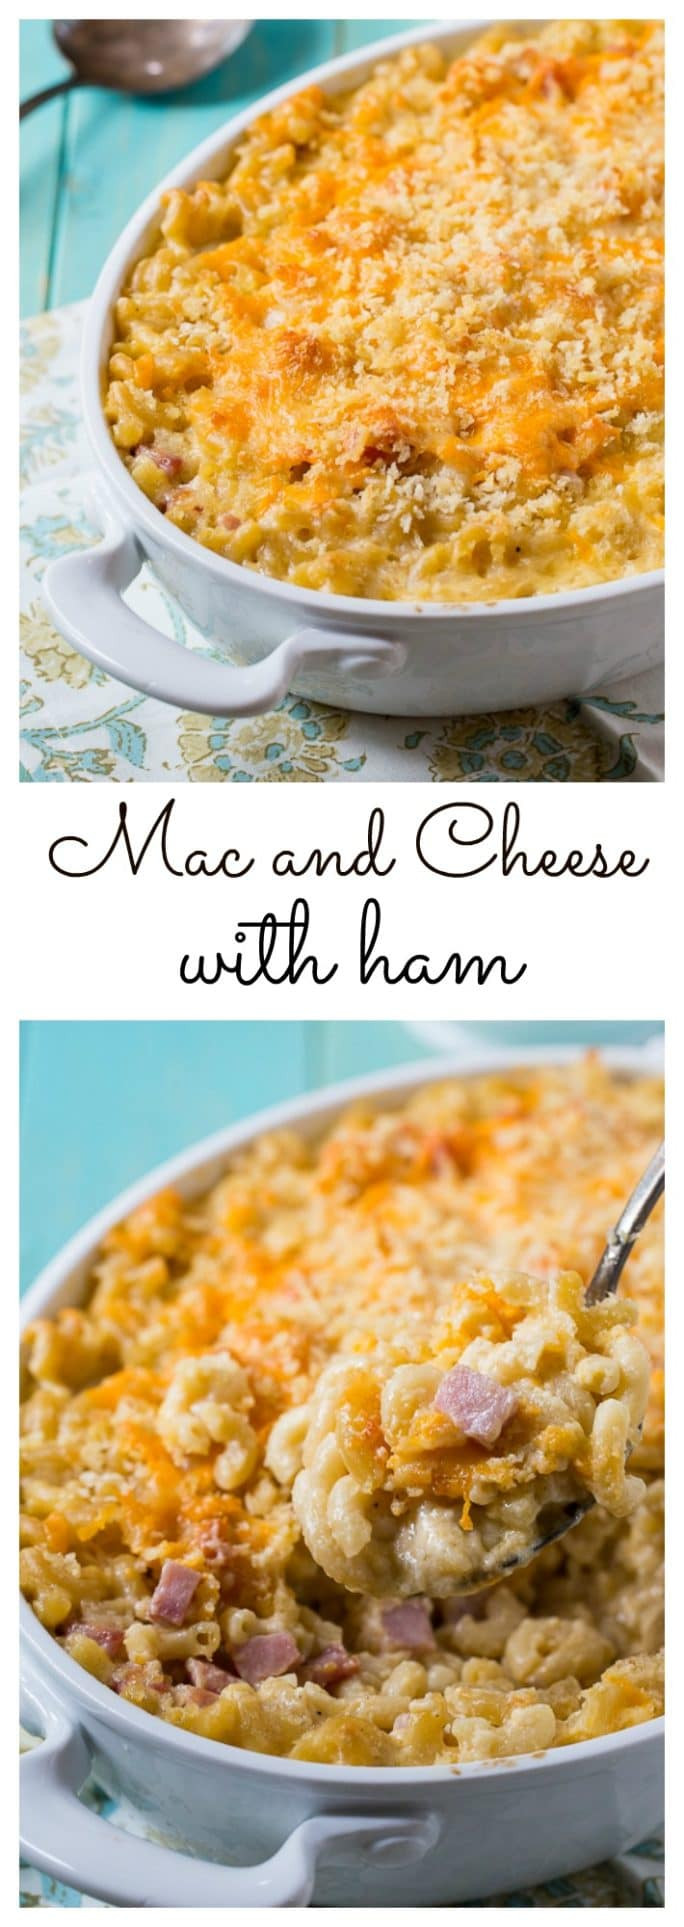 Baked Macaroni And Cheese With Ham Recipe
 Mac and Cheese with Ham Spicy Southern Kitchen